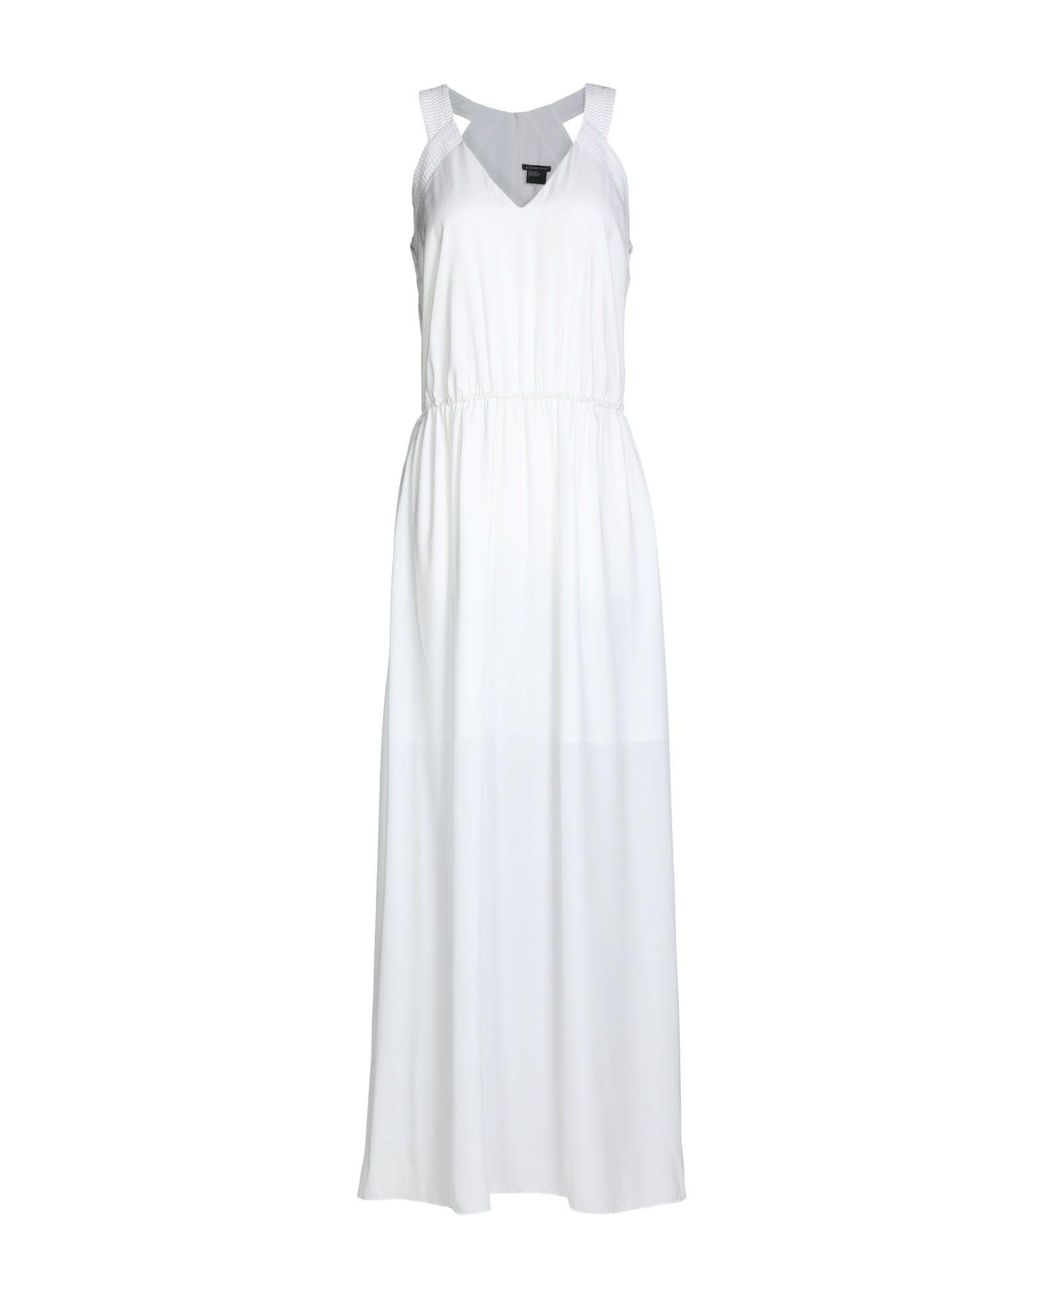 Armani Exchange Synthetic Long Dress in White - Lyst